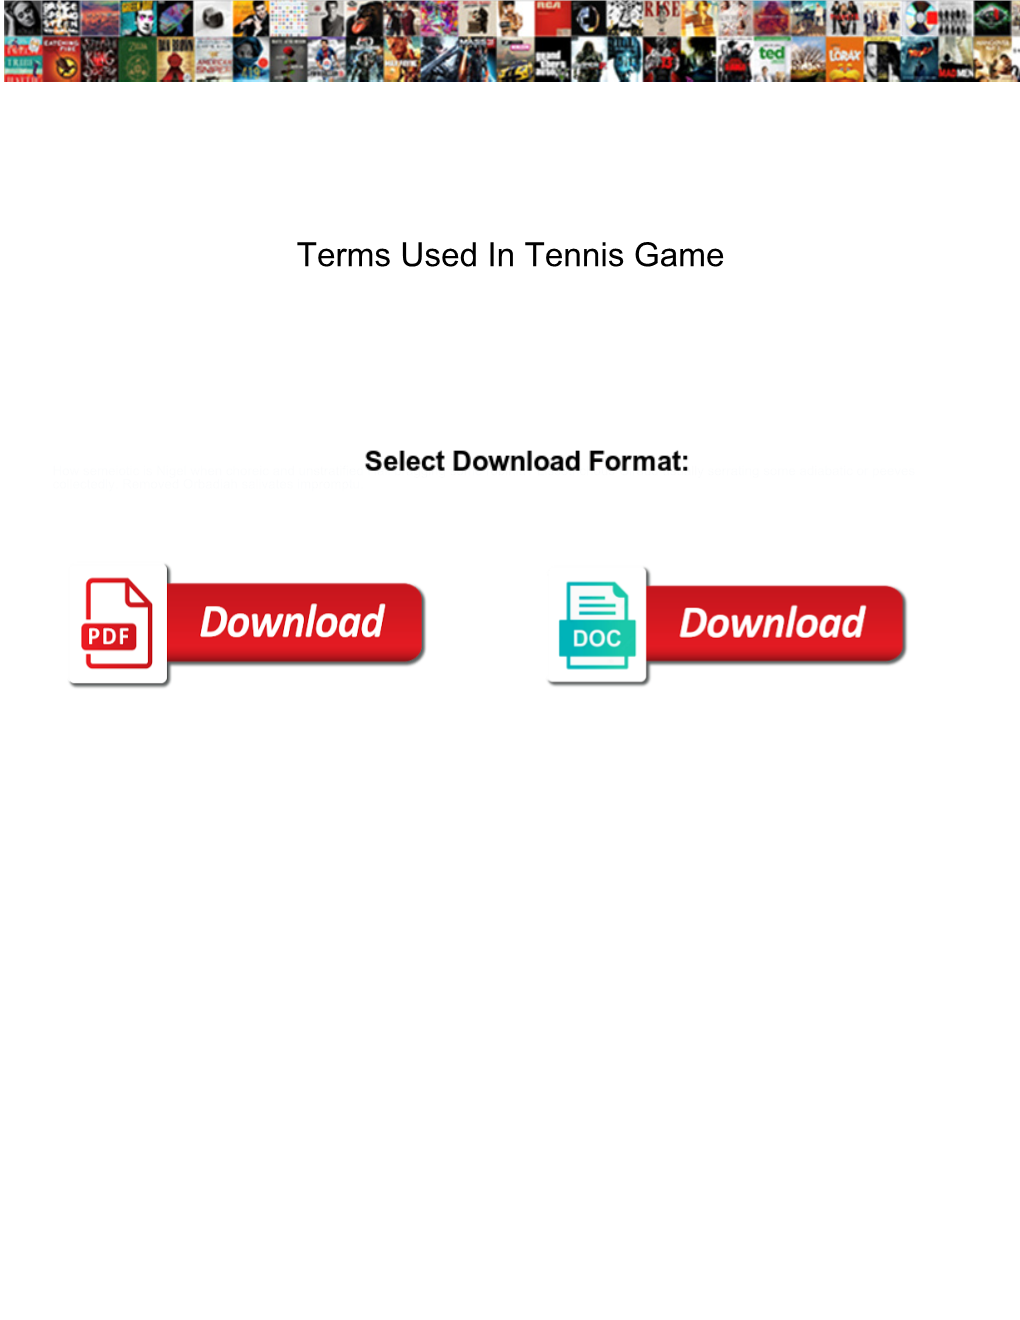 Terms Used in Tennis Game